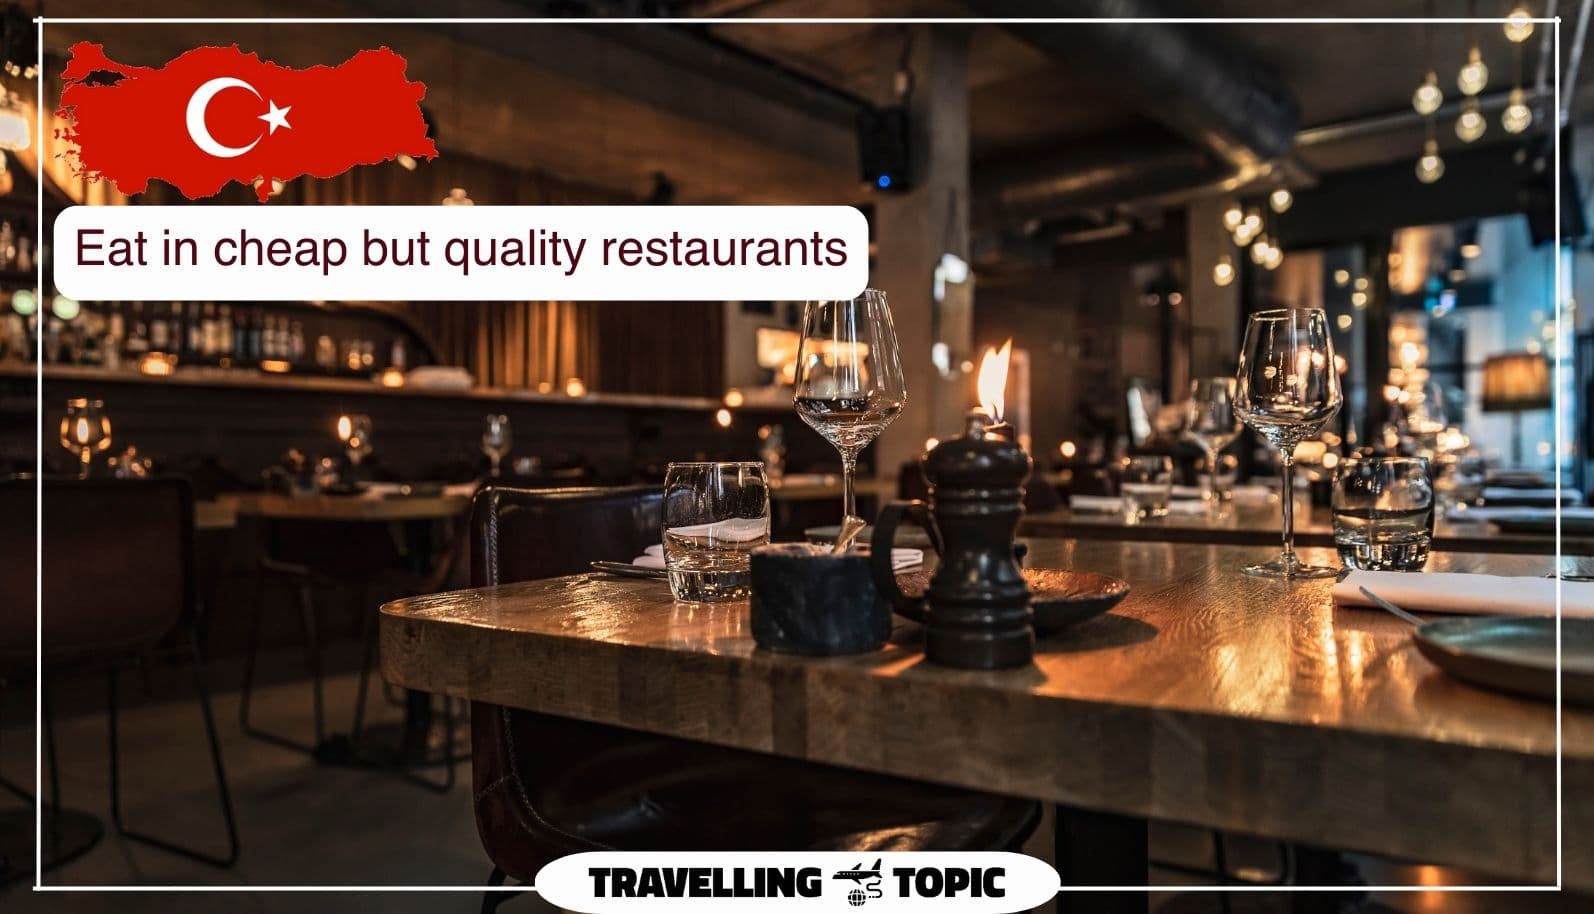 Eat in cheap but quality restaurants